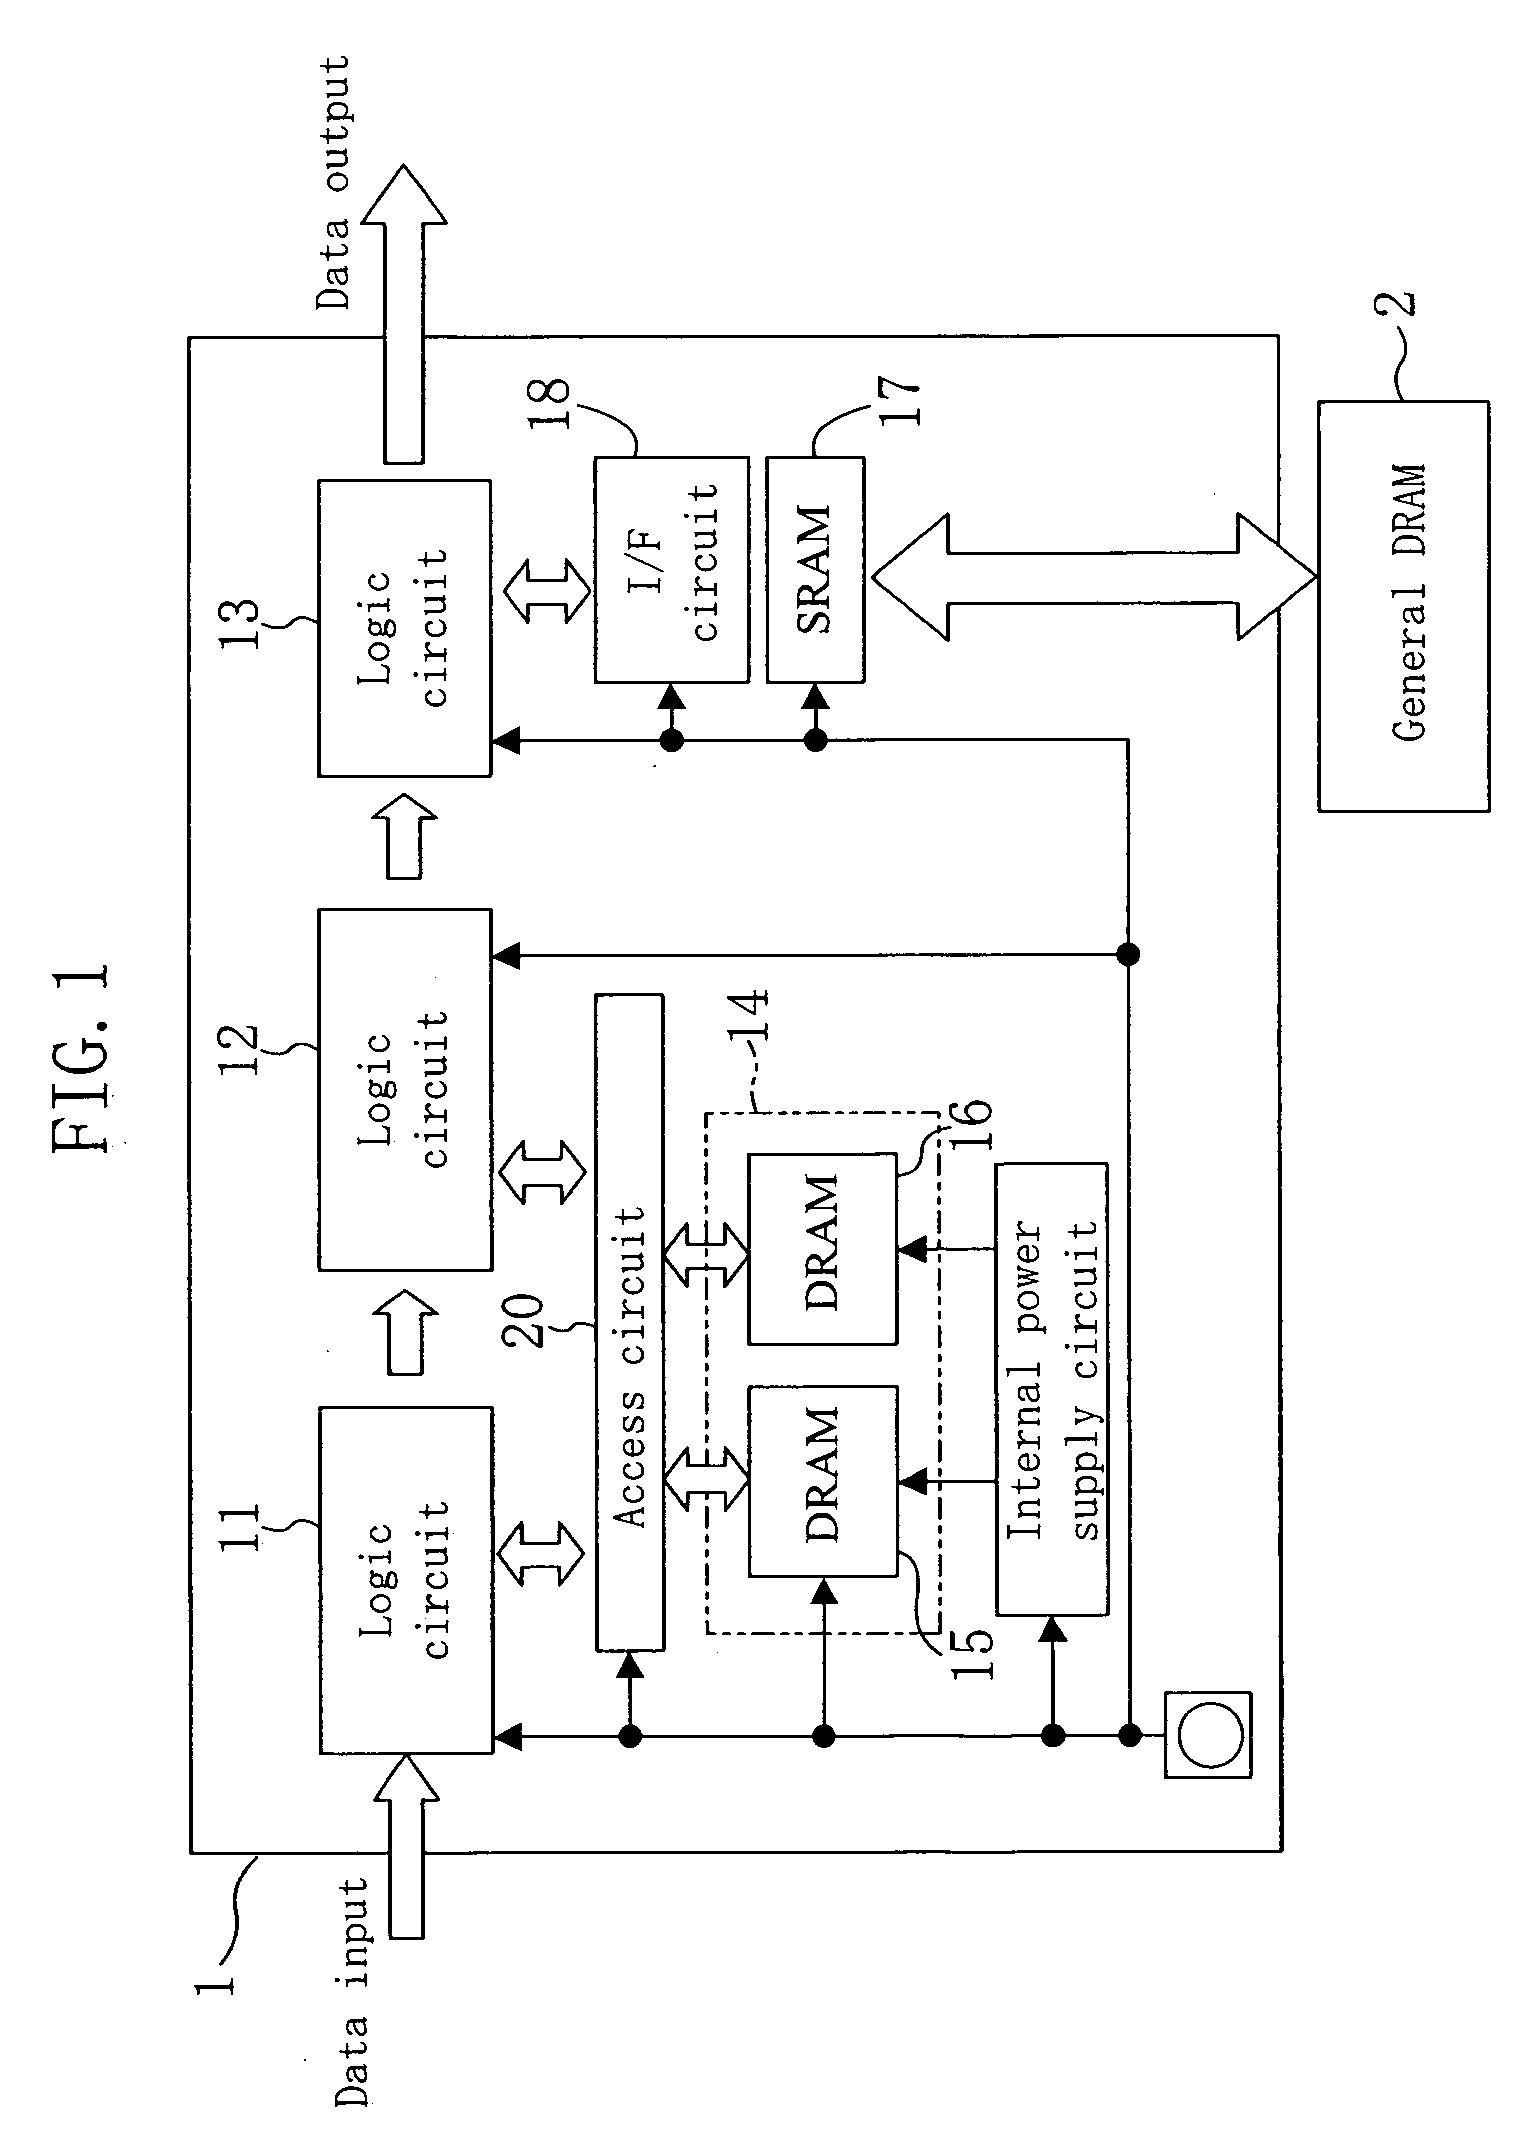 Semiconductor integrated circuit device having a common DRAM block accessed by a plurality of logic circuits